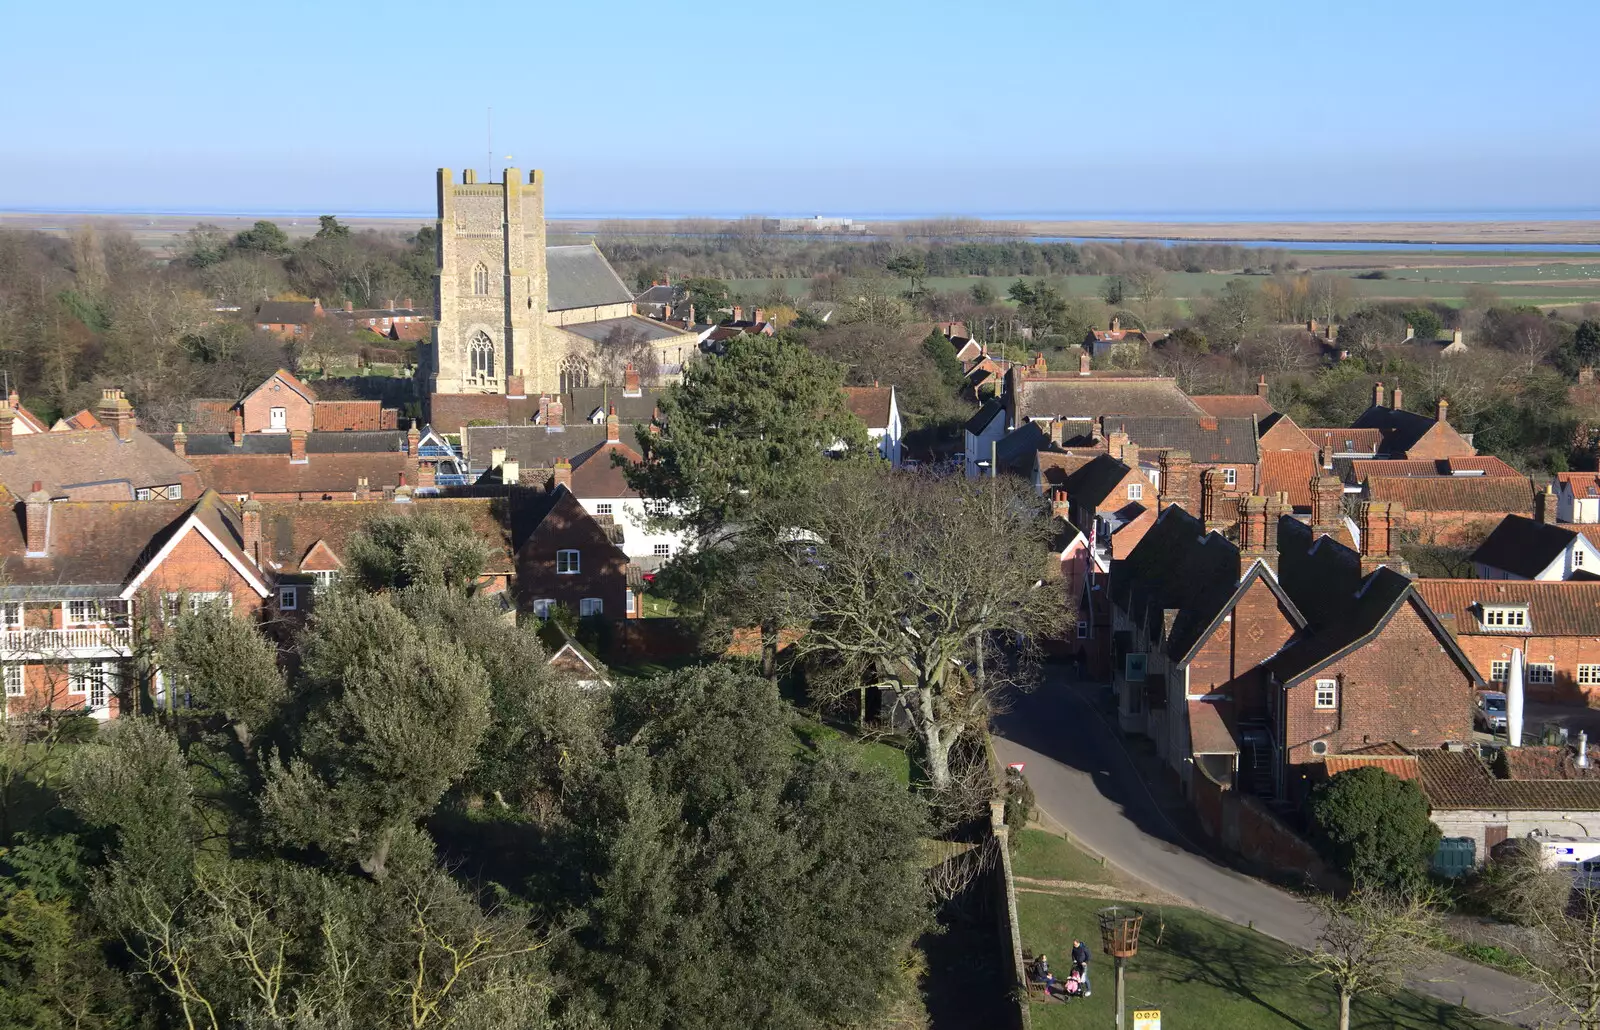 More of the town of Orford, from An Orford Day Out, Orford, Suffolk - 17th February 2018